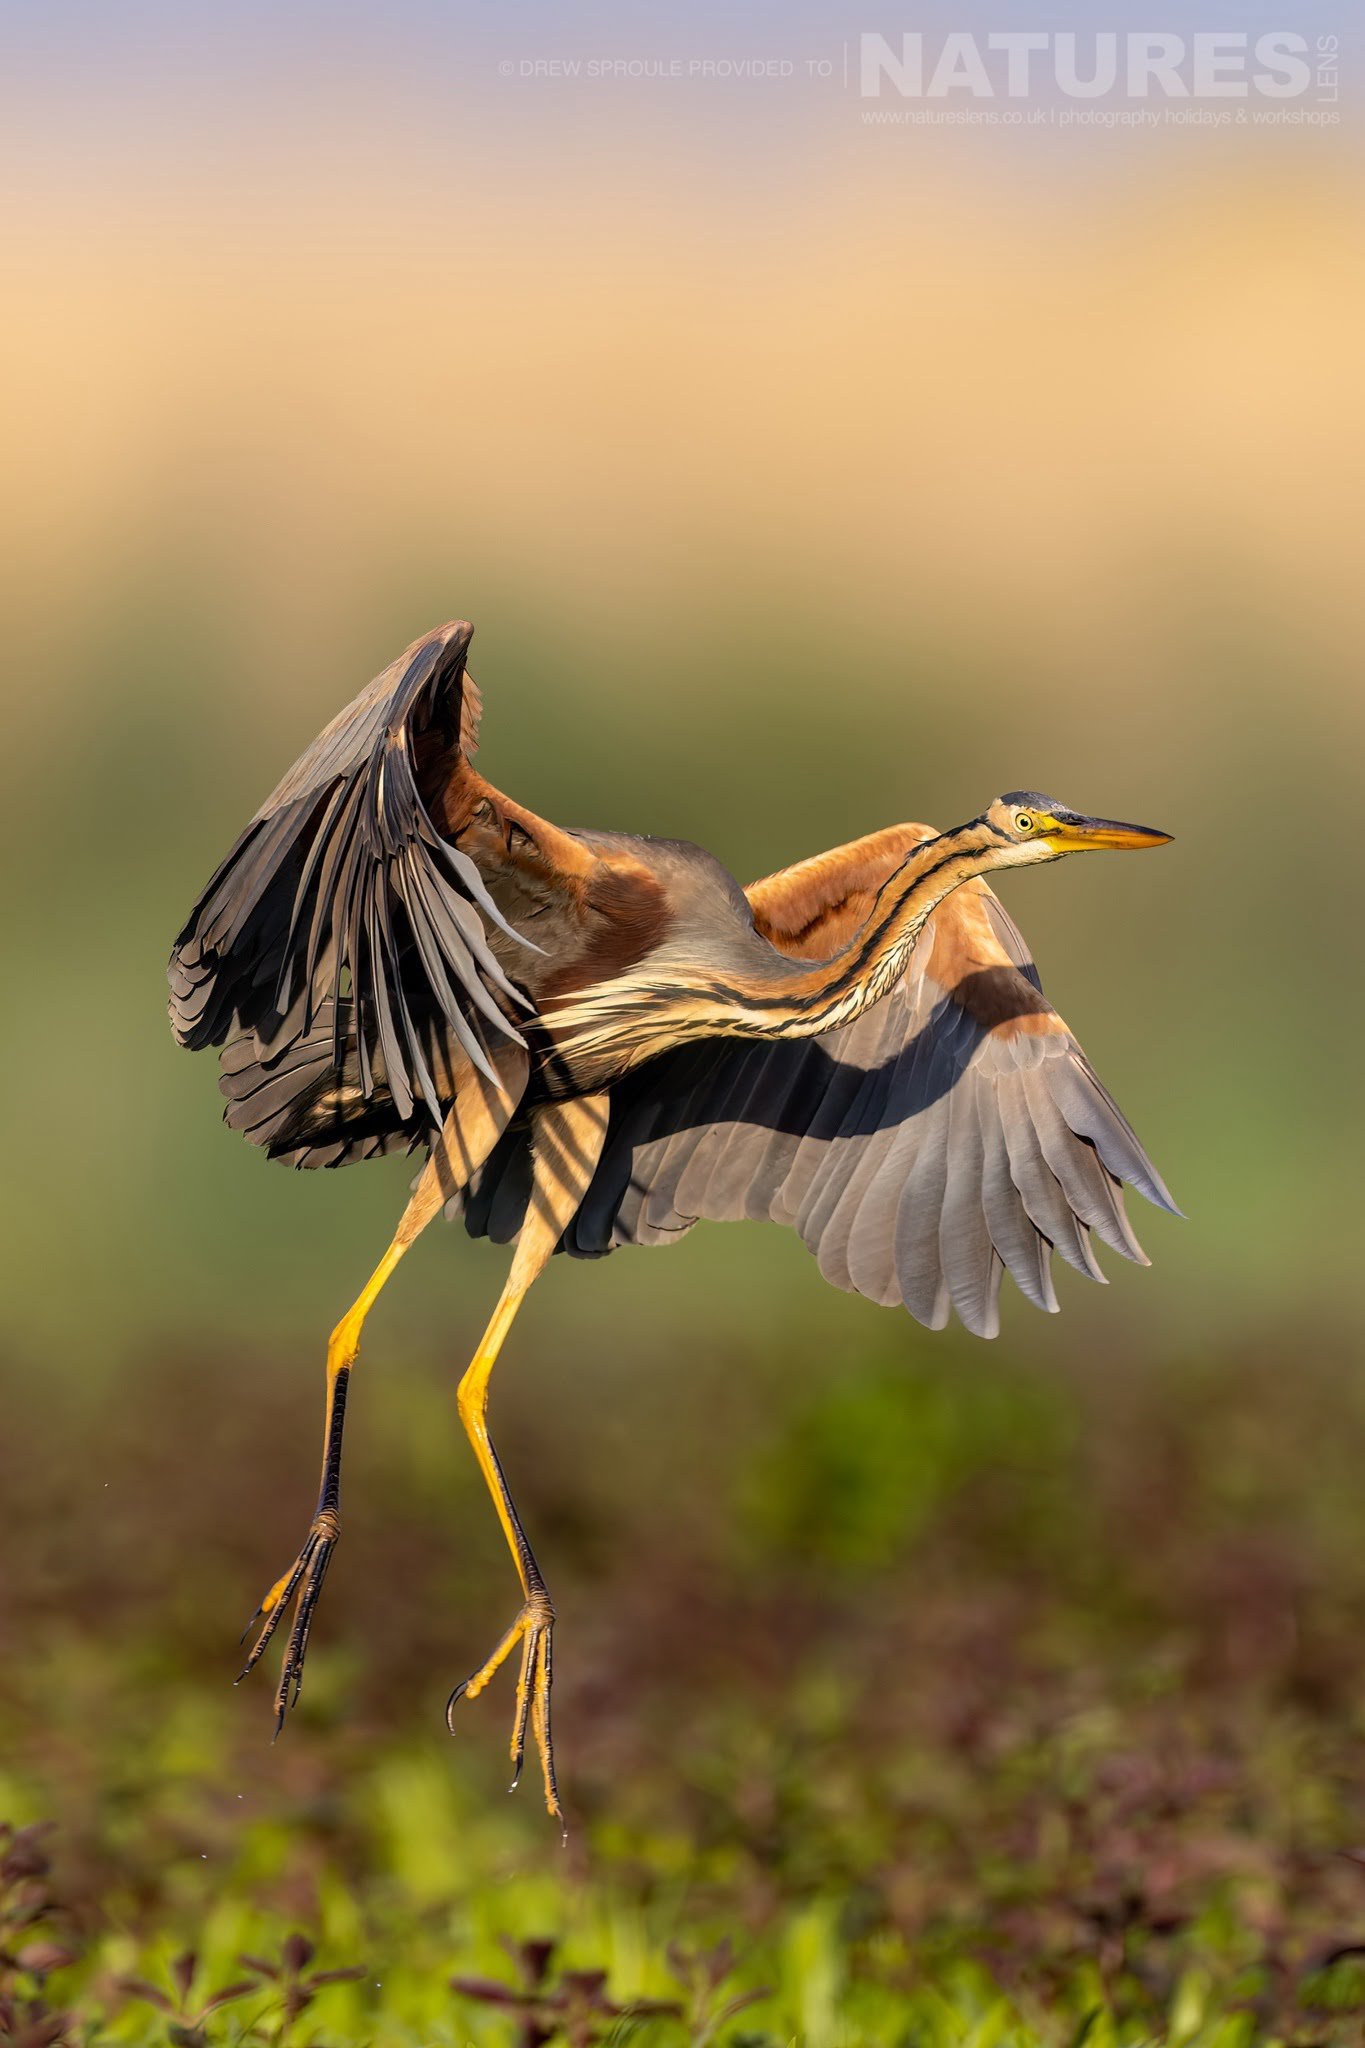 A Purple Heron Comes In For A Landing Typical Of The Kind Of Image You Will Capture During The Birdlife Of The Danube Delta Photography Trip